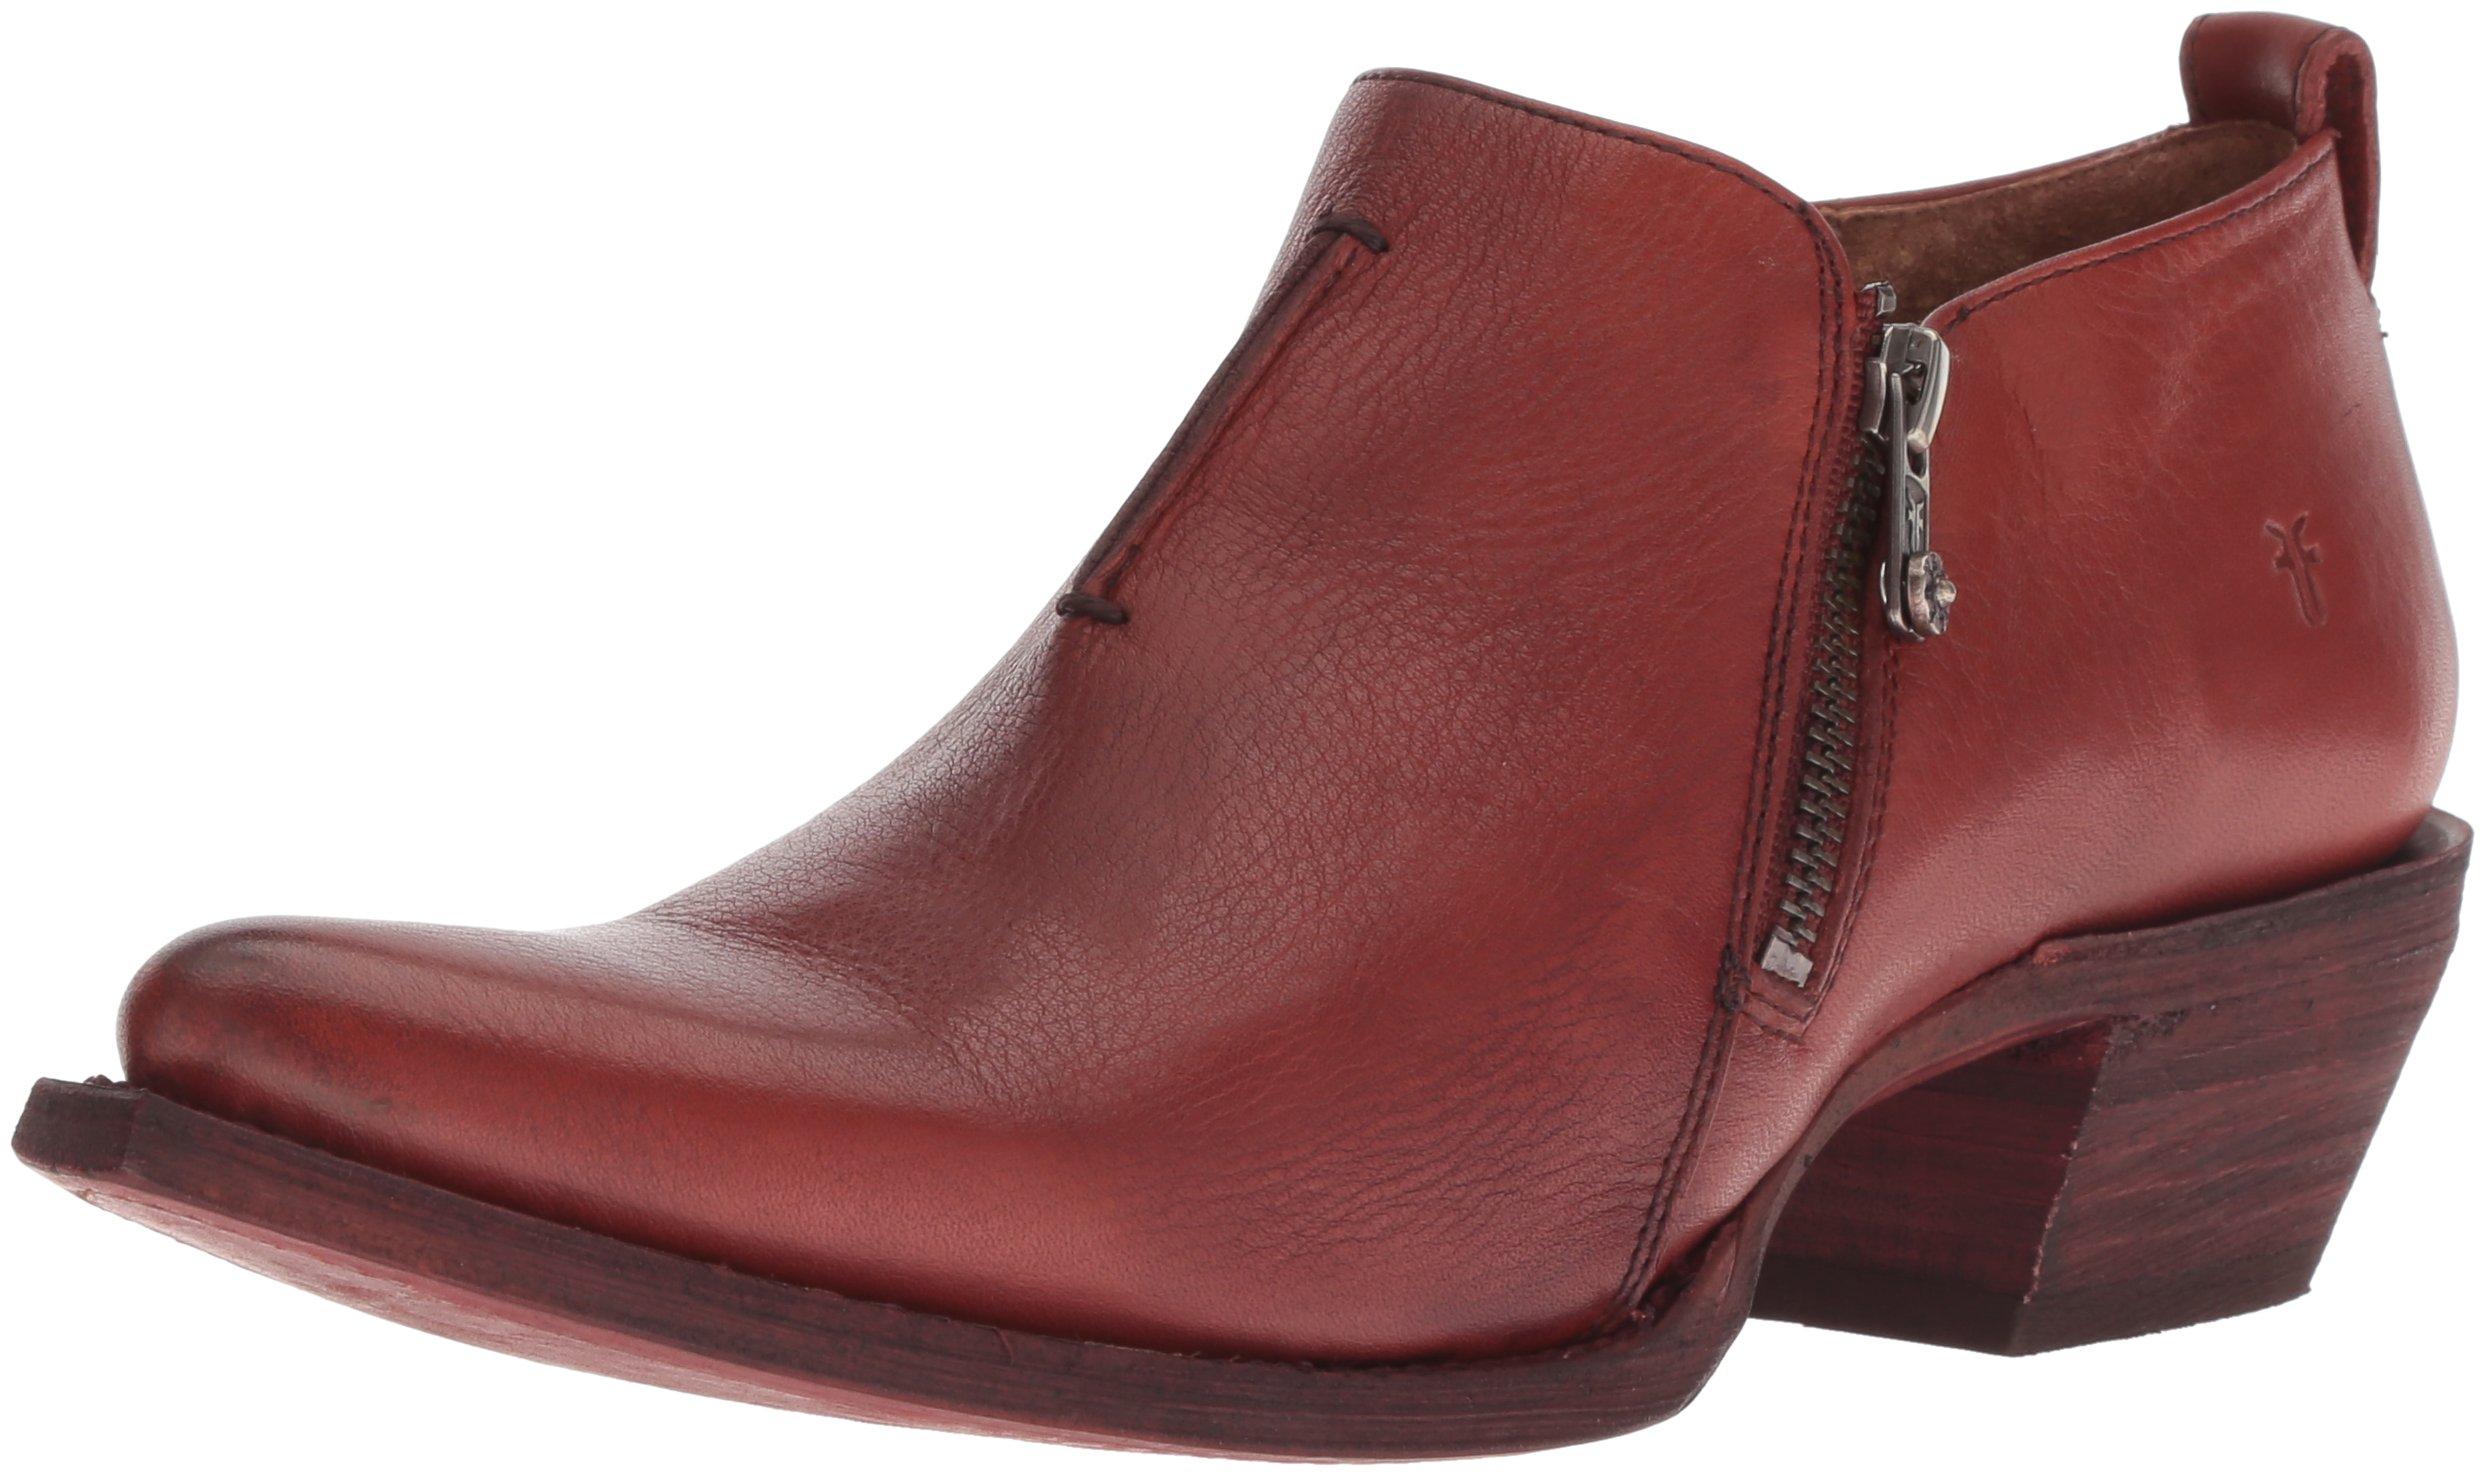 Frye Sacha Moto Shootie Ankle Boot in Red Clay (Red) Lyst